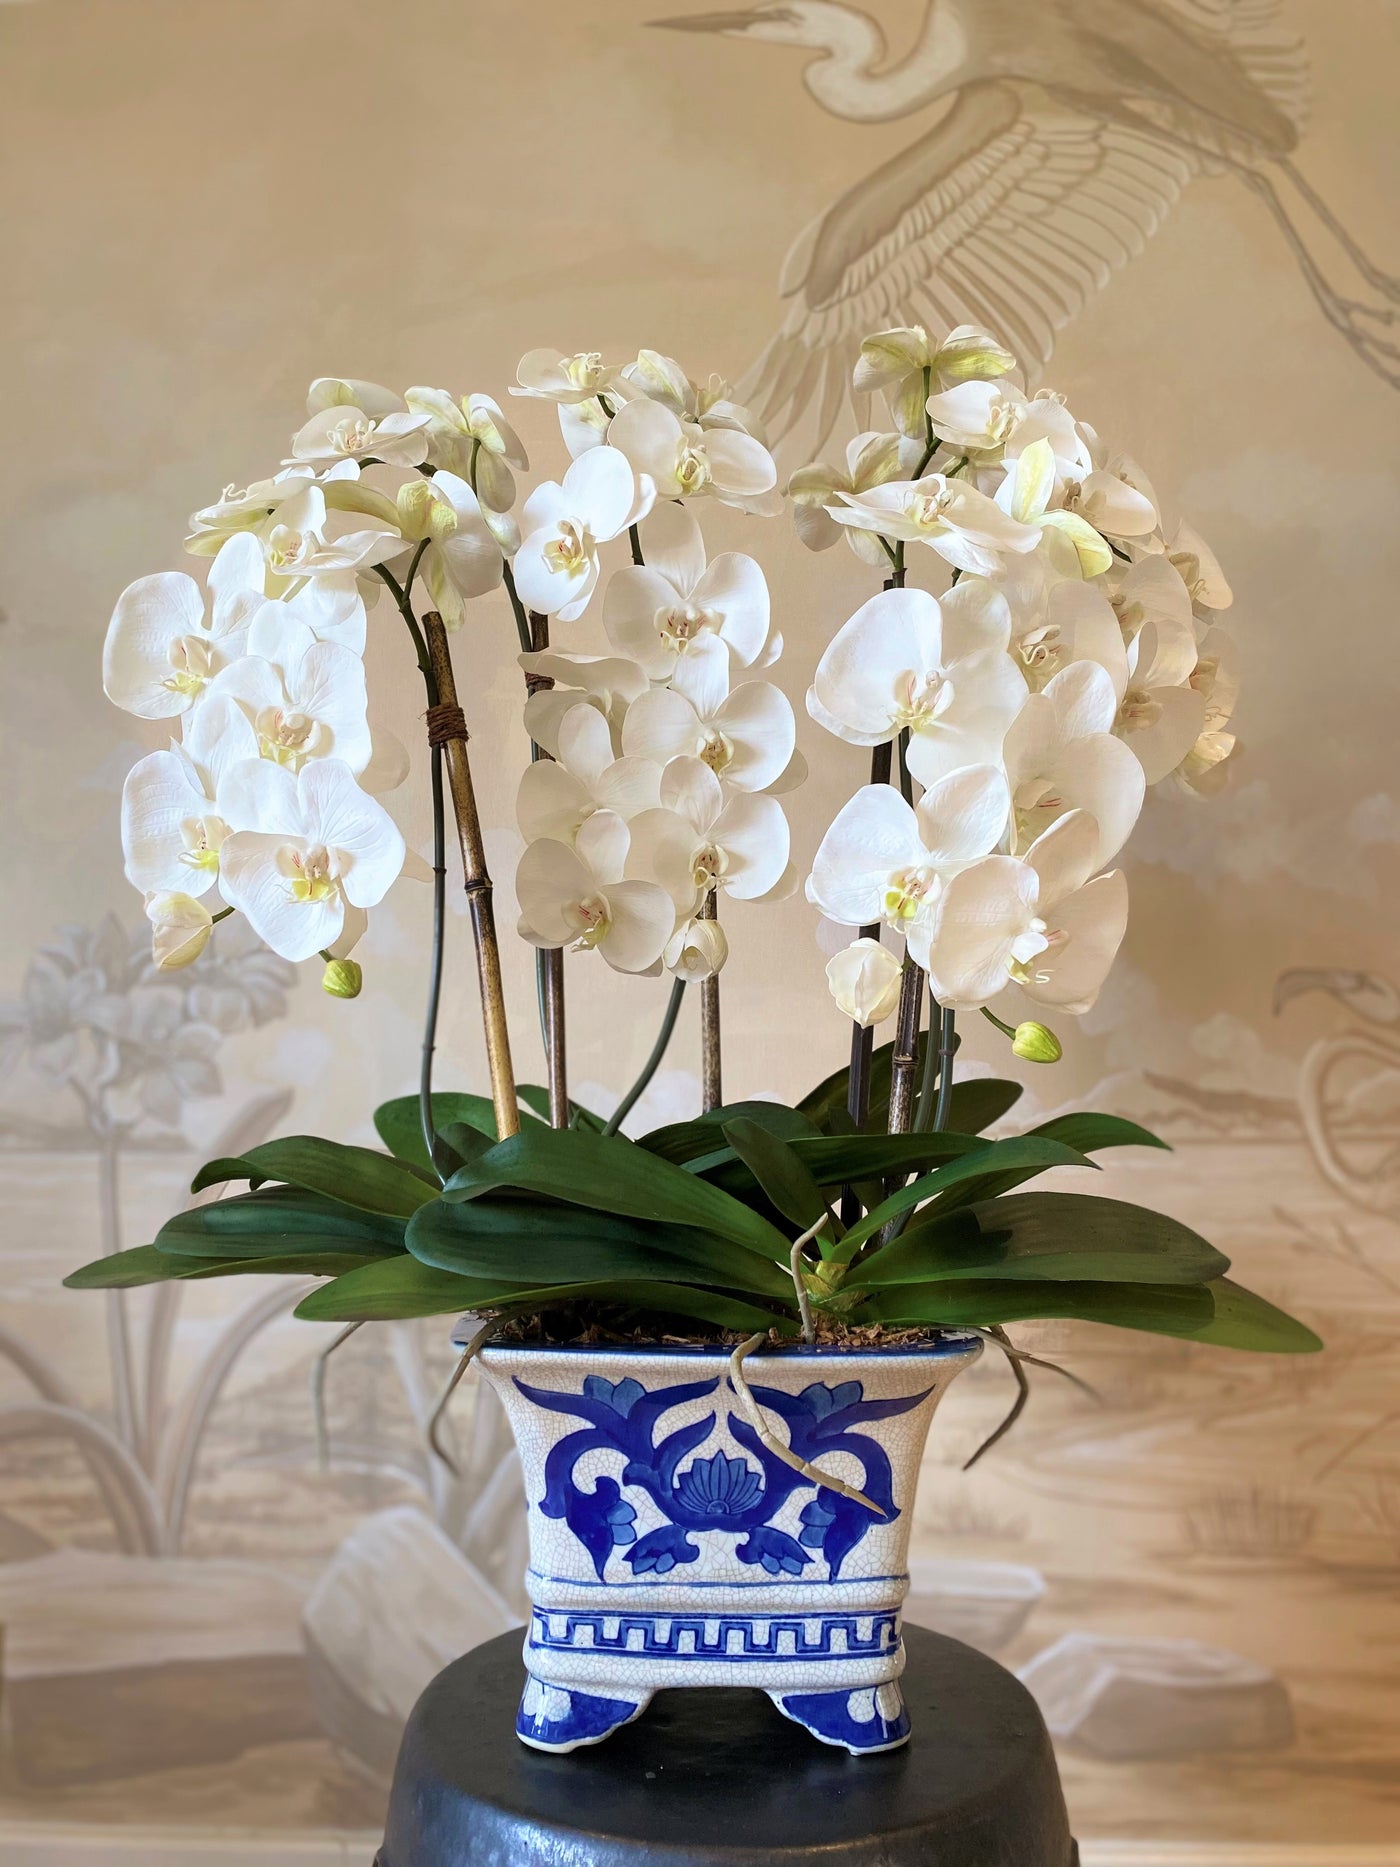 Phalaenopsis Orchid x5 in Blue & White Vase 32"H